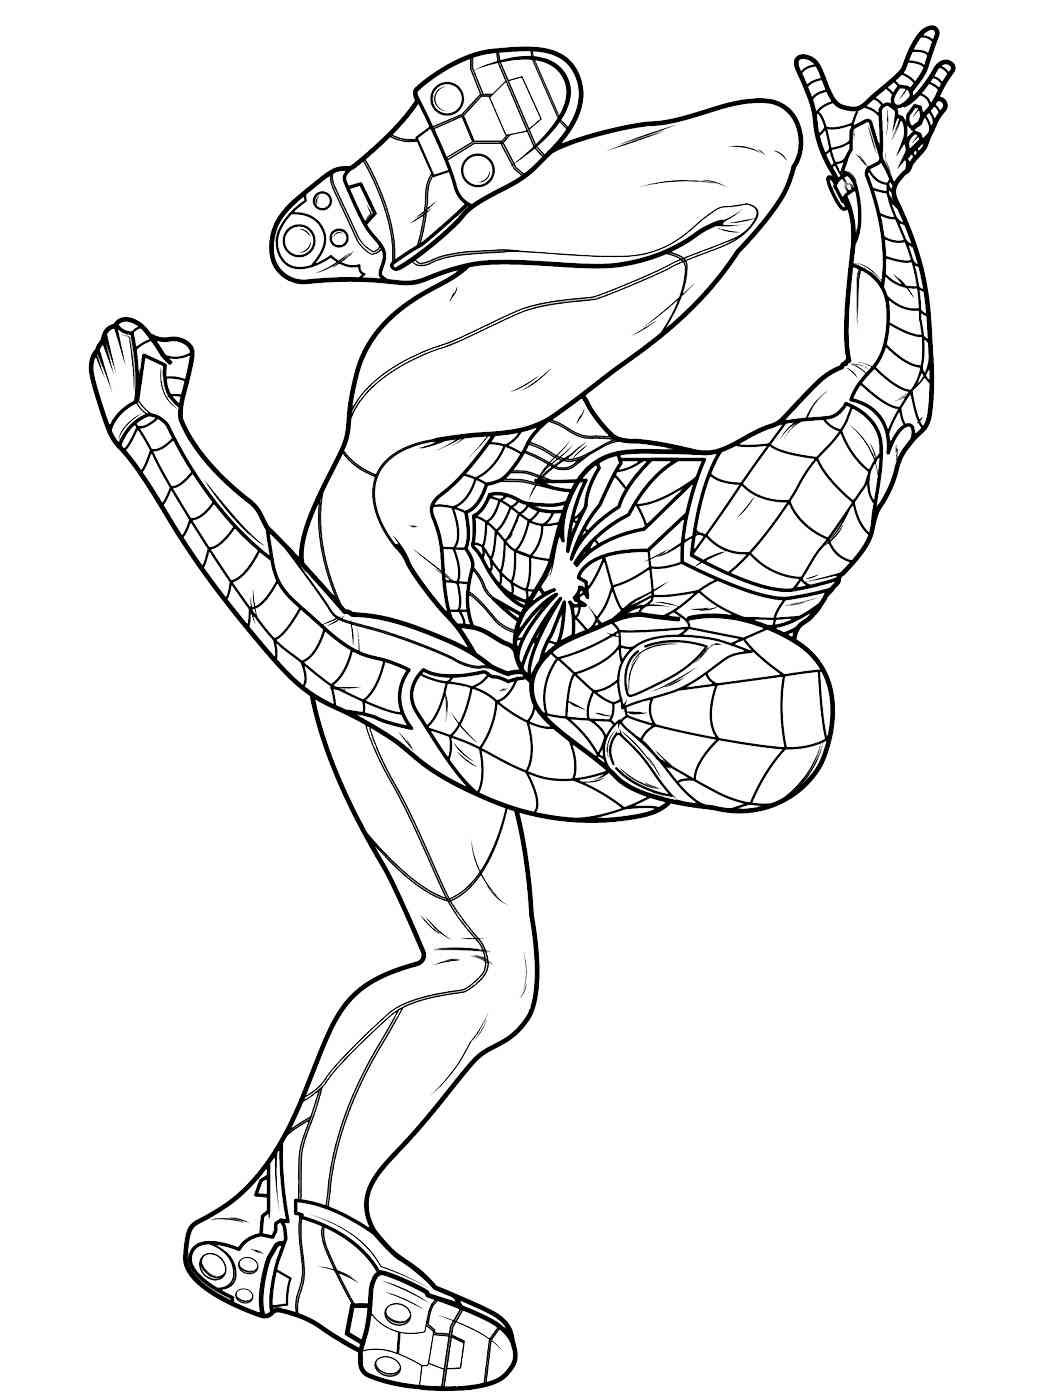 Spider man coloring pages. Download and print Spider man coloring ...